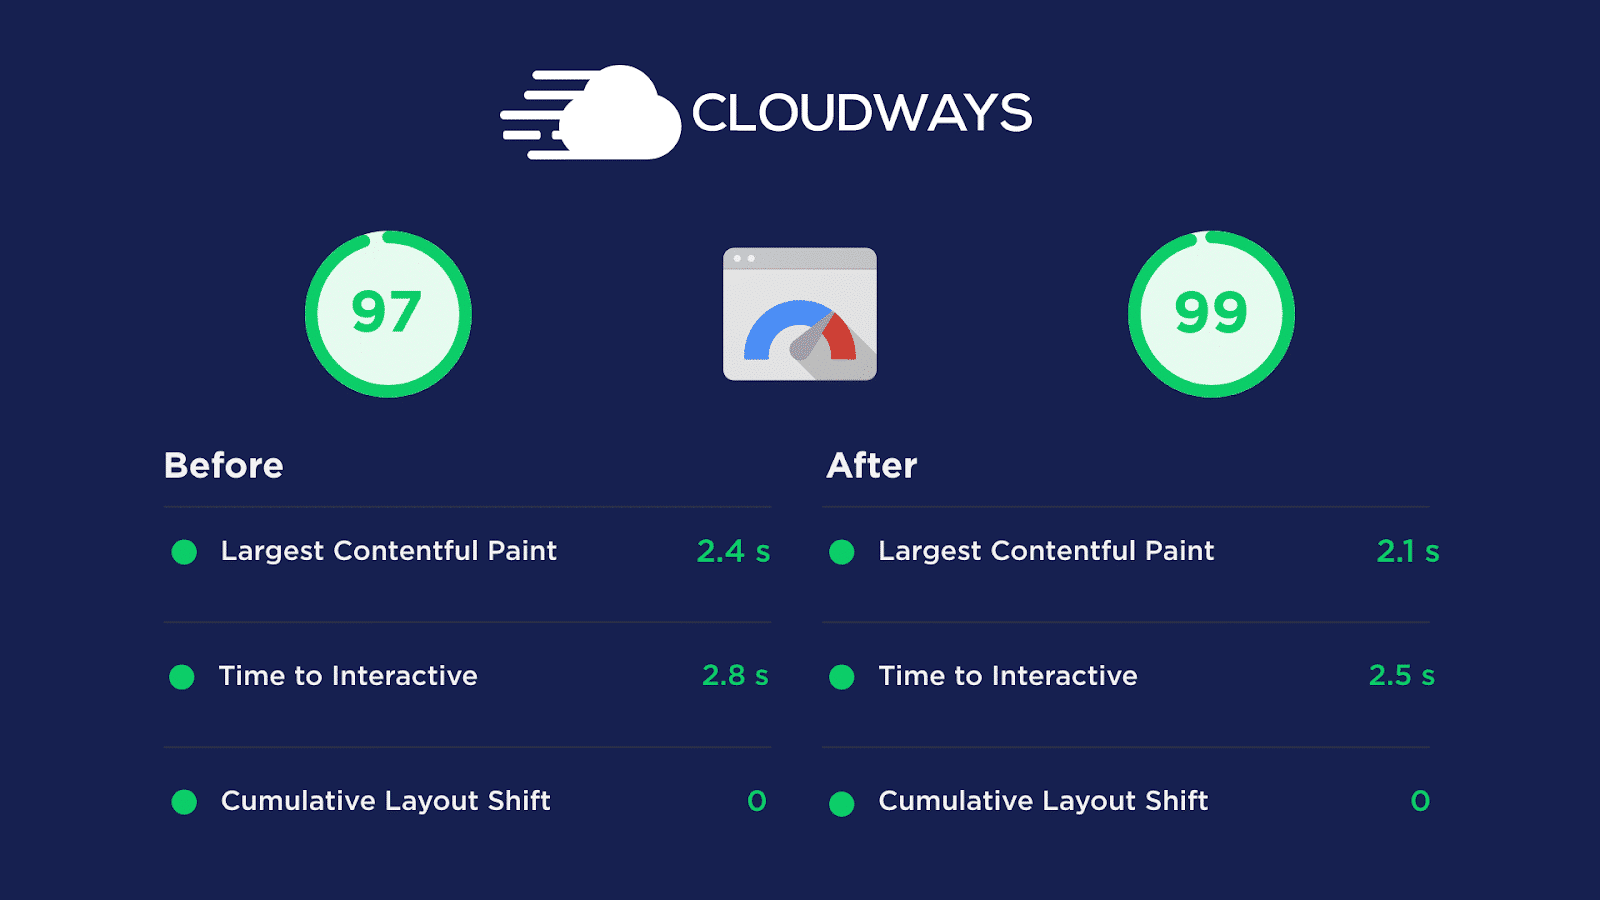 Cloudways PageSpeed Insight score